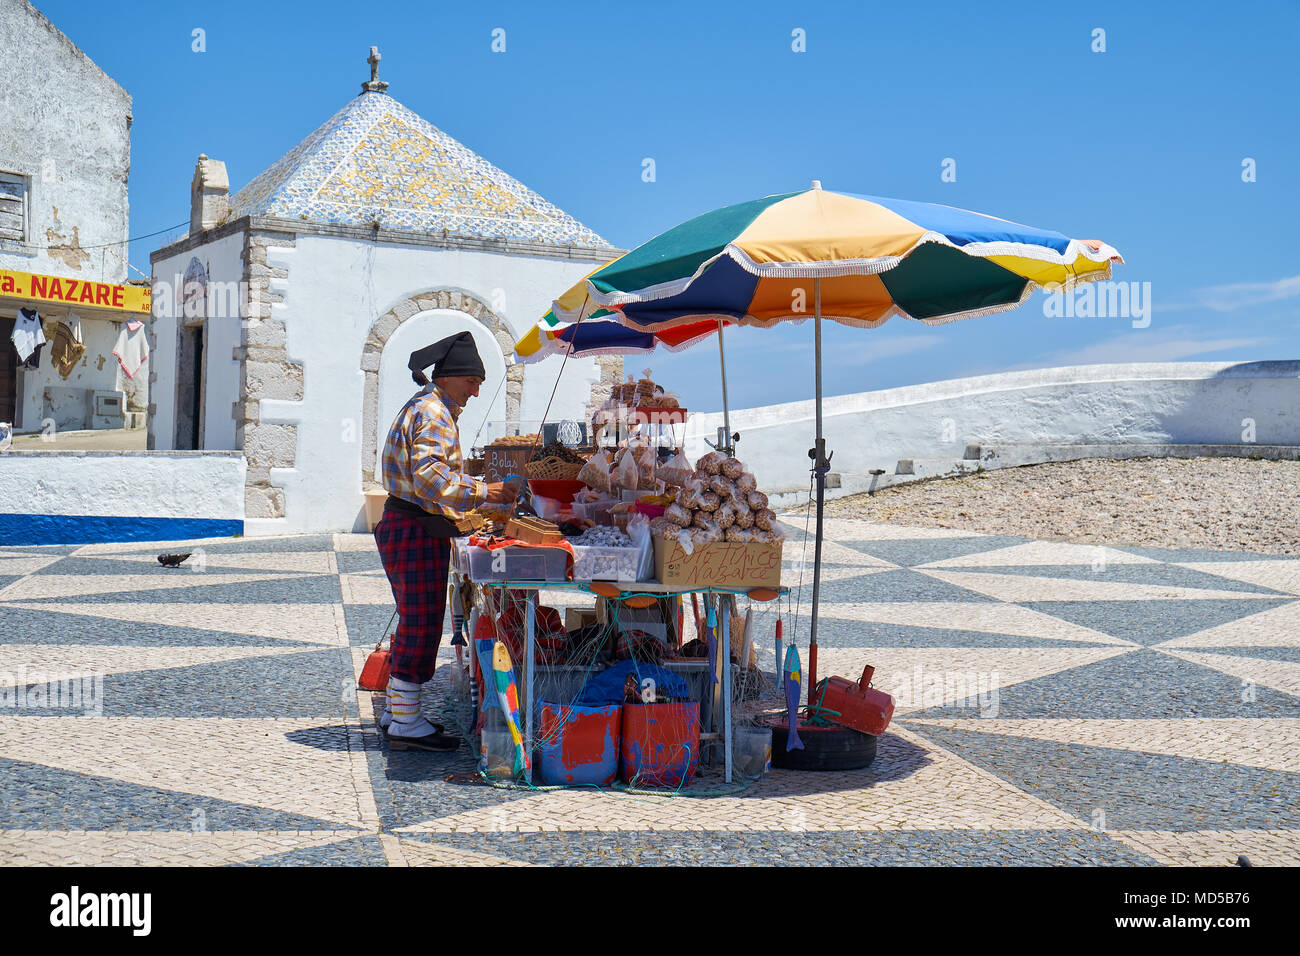 NAZARE, PORTUGAL - JUNE 26, 2016: The street vendor in the colorful traditional costume on the central square of Nazare with the Memory Chapel (Ermida Stock Photo